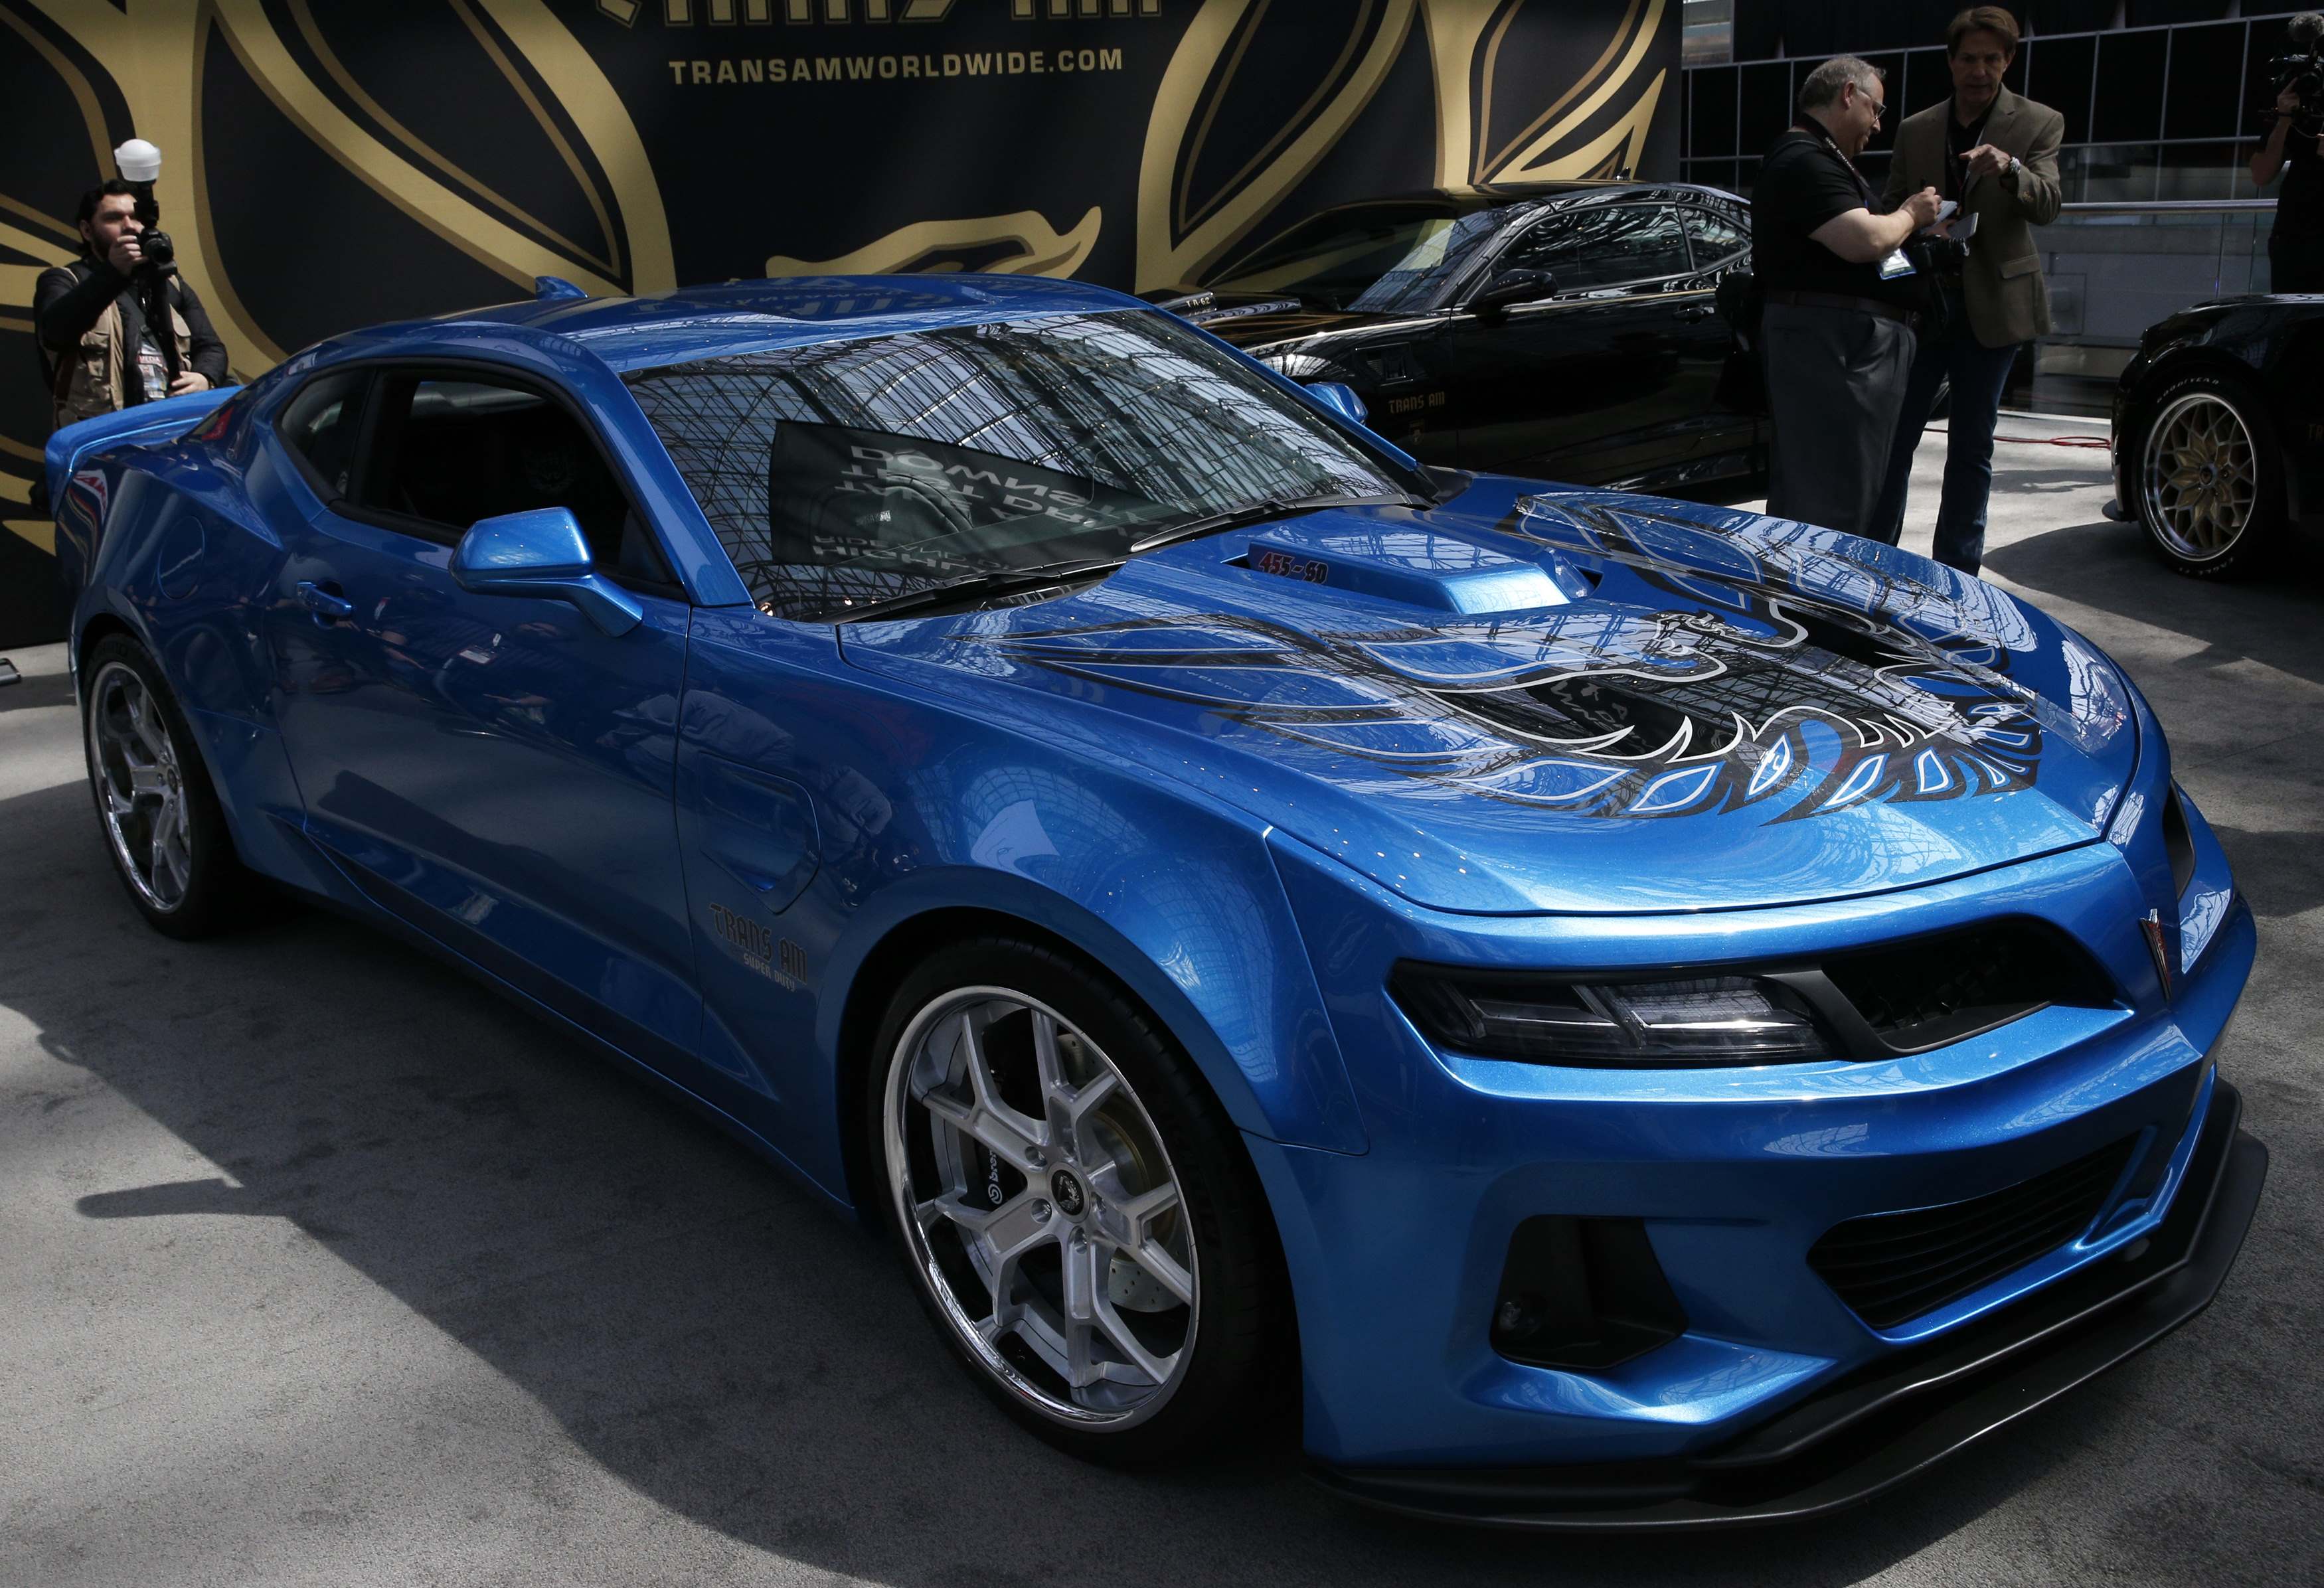 A 2017 Trans Am Super Duty is displayed at the 2017 New York International Auto Show in New York City, U.S. April 13, 2017. REUTERS/Andrew Kelly